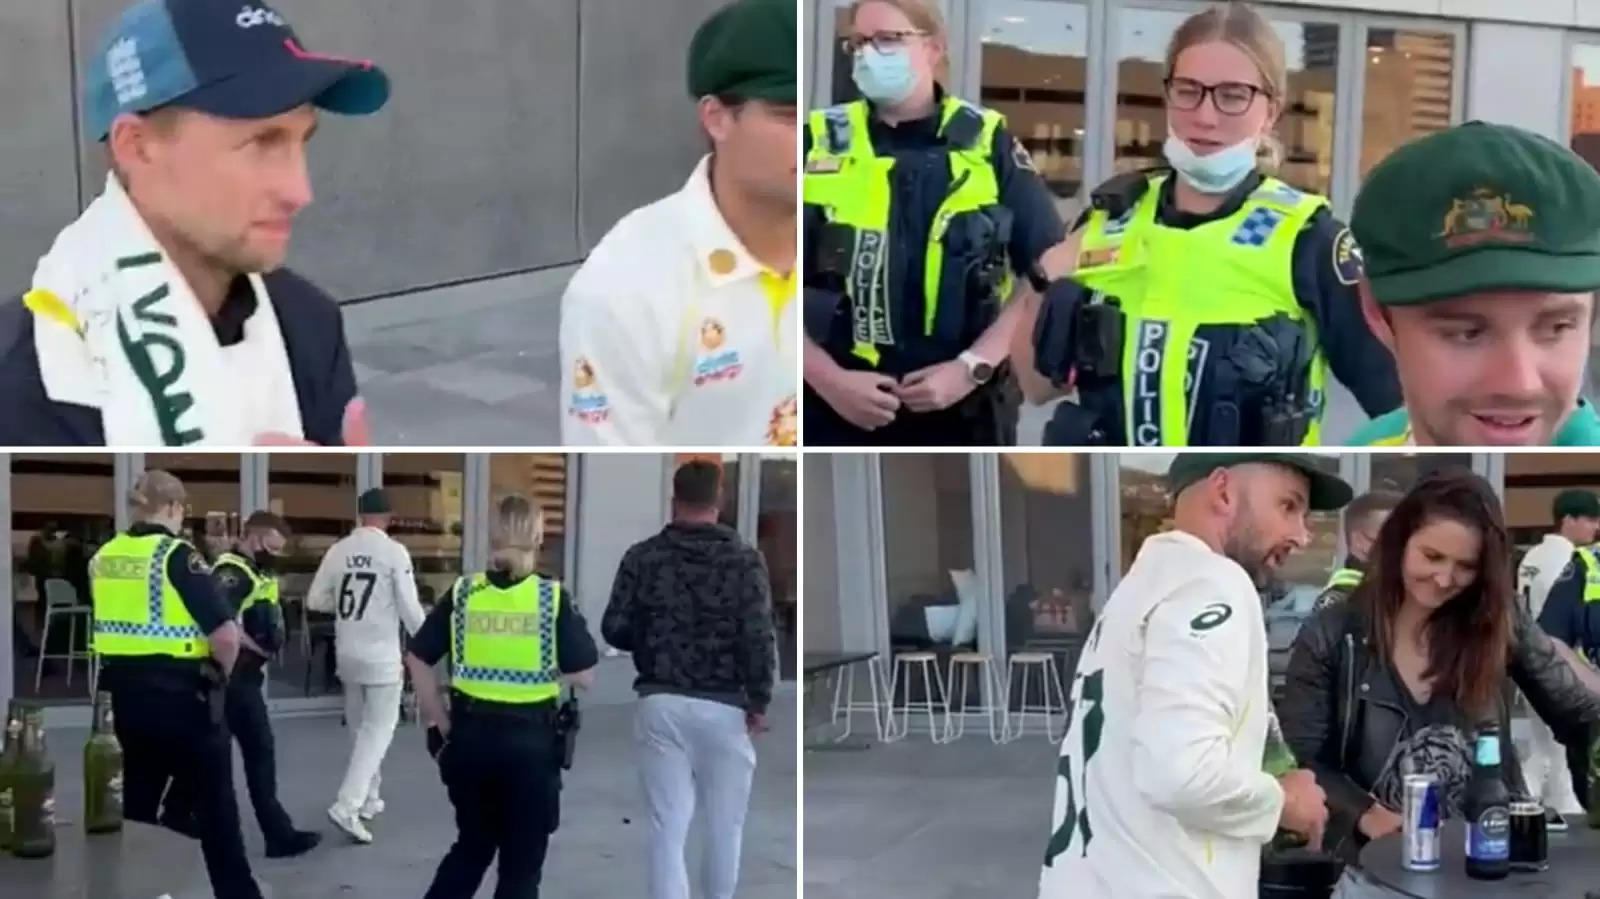 WATCH: Police shut down overnight Ashes drinking episode involving Root, Anderson, Lyon